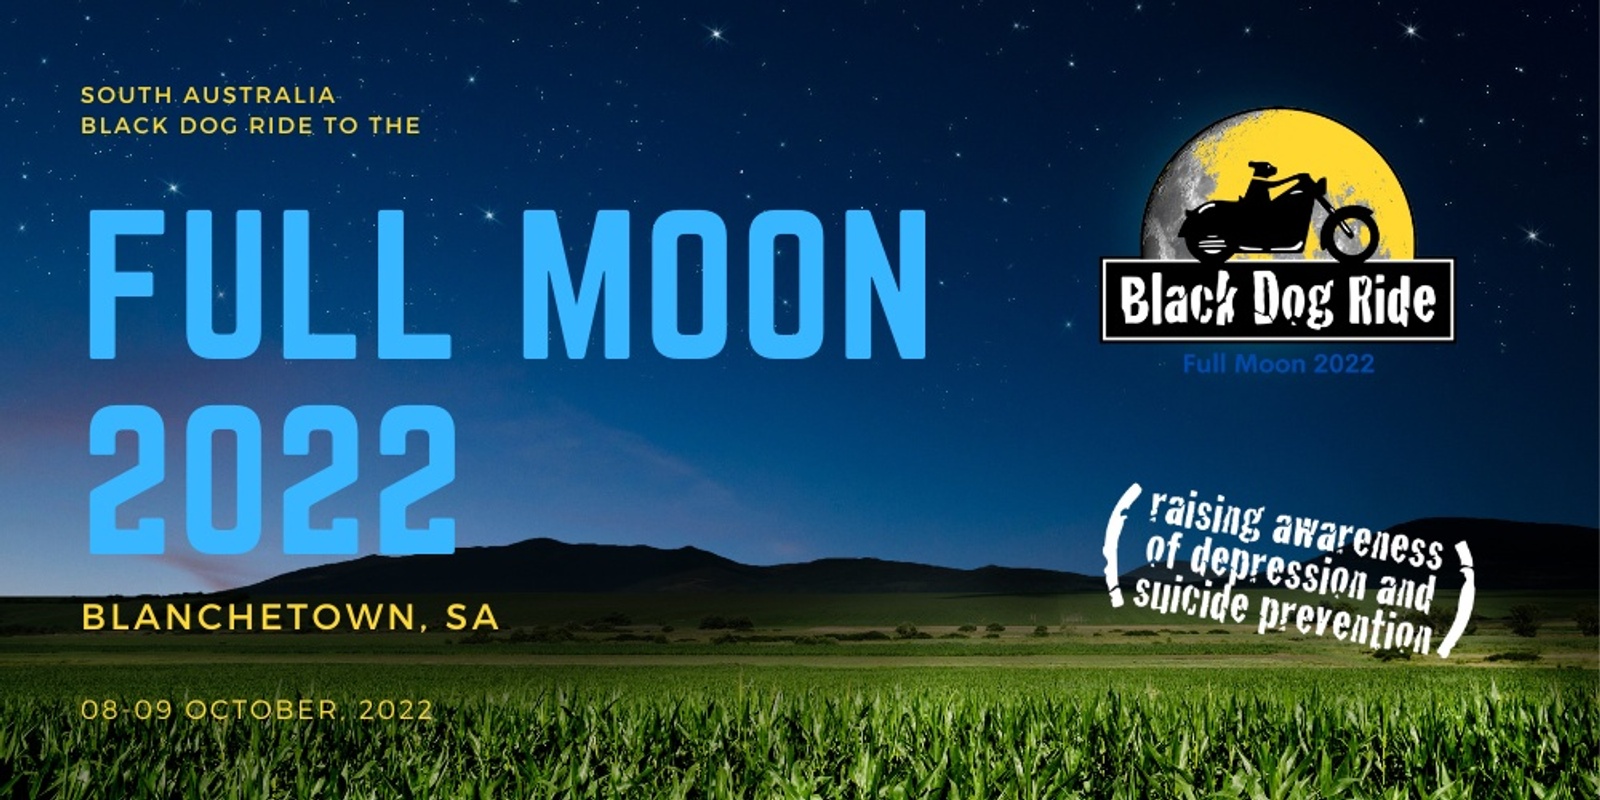 Banner image for SA - Black Dog Ride to the Full Moon 2022